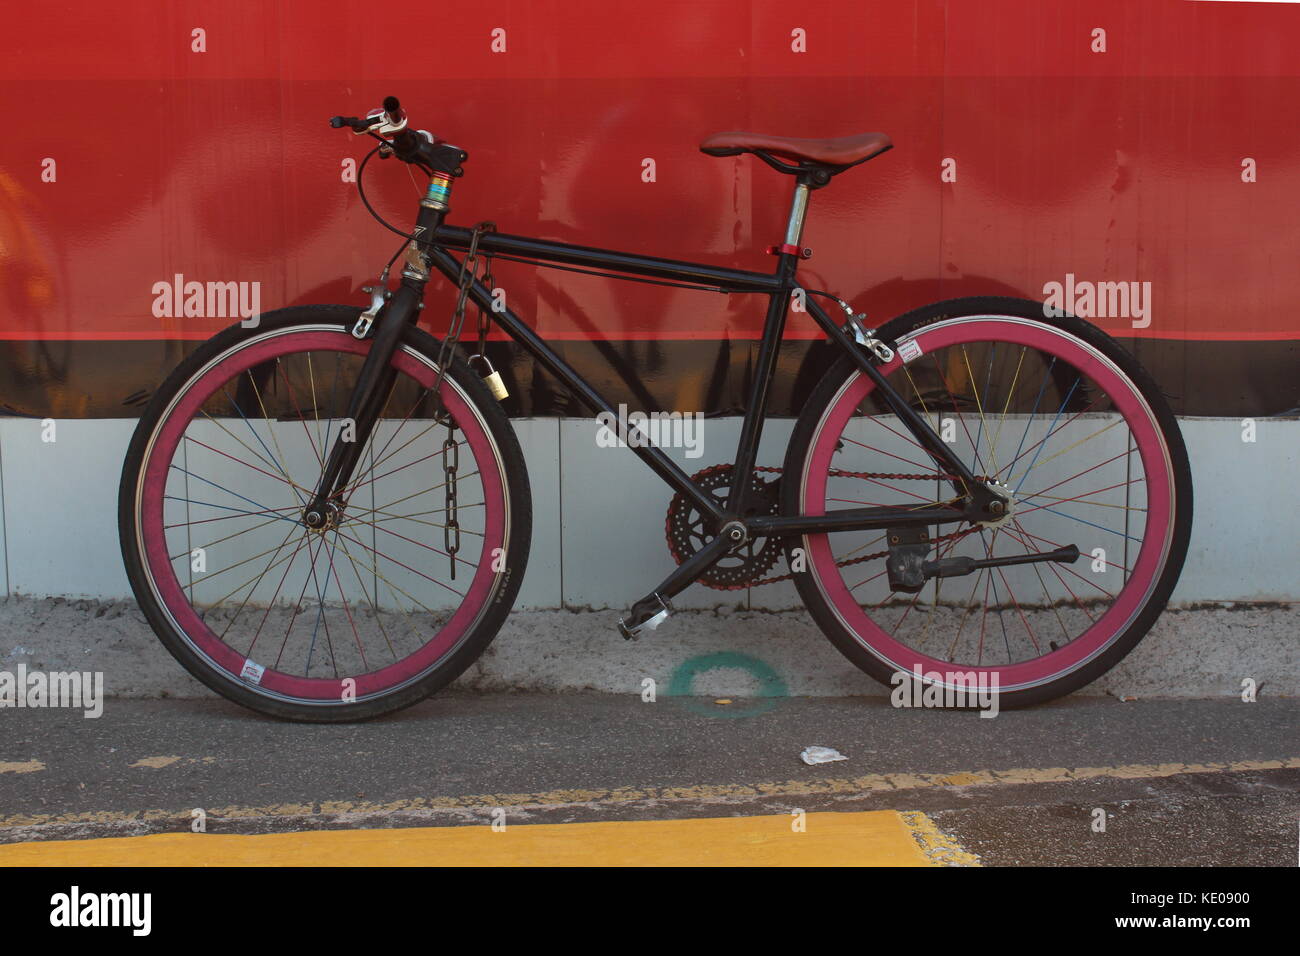 A Road Bike Against a Red and Black background. Stock Photo